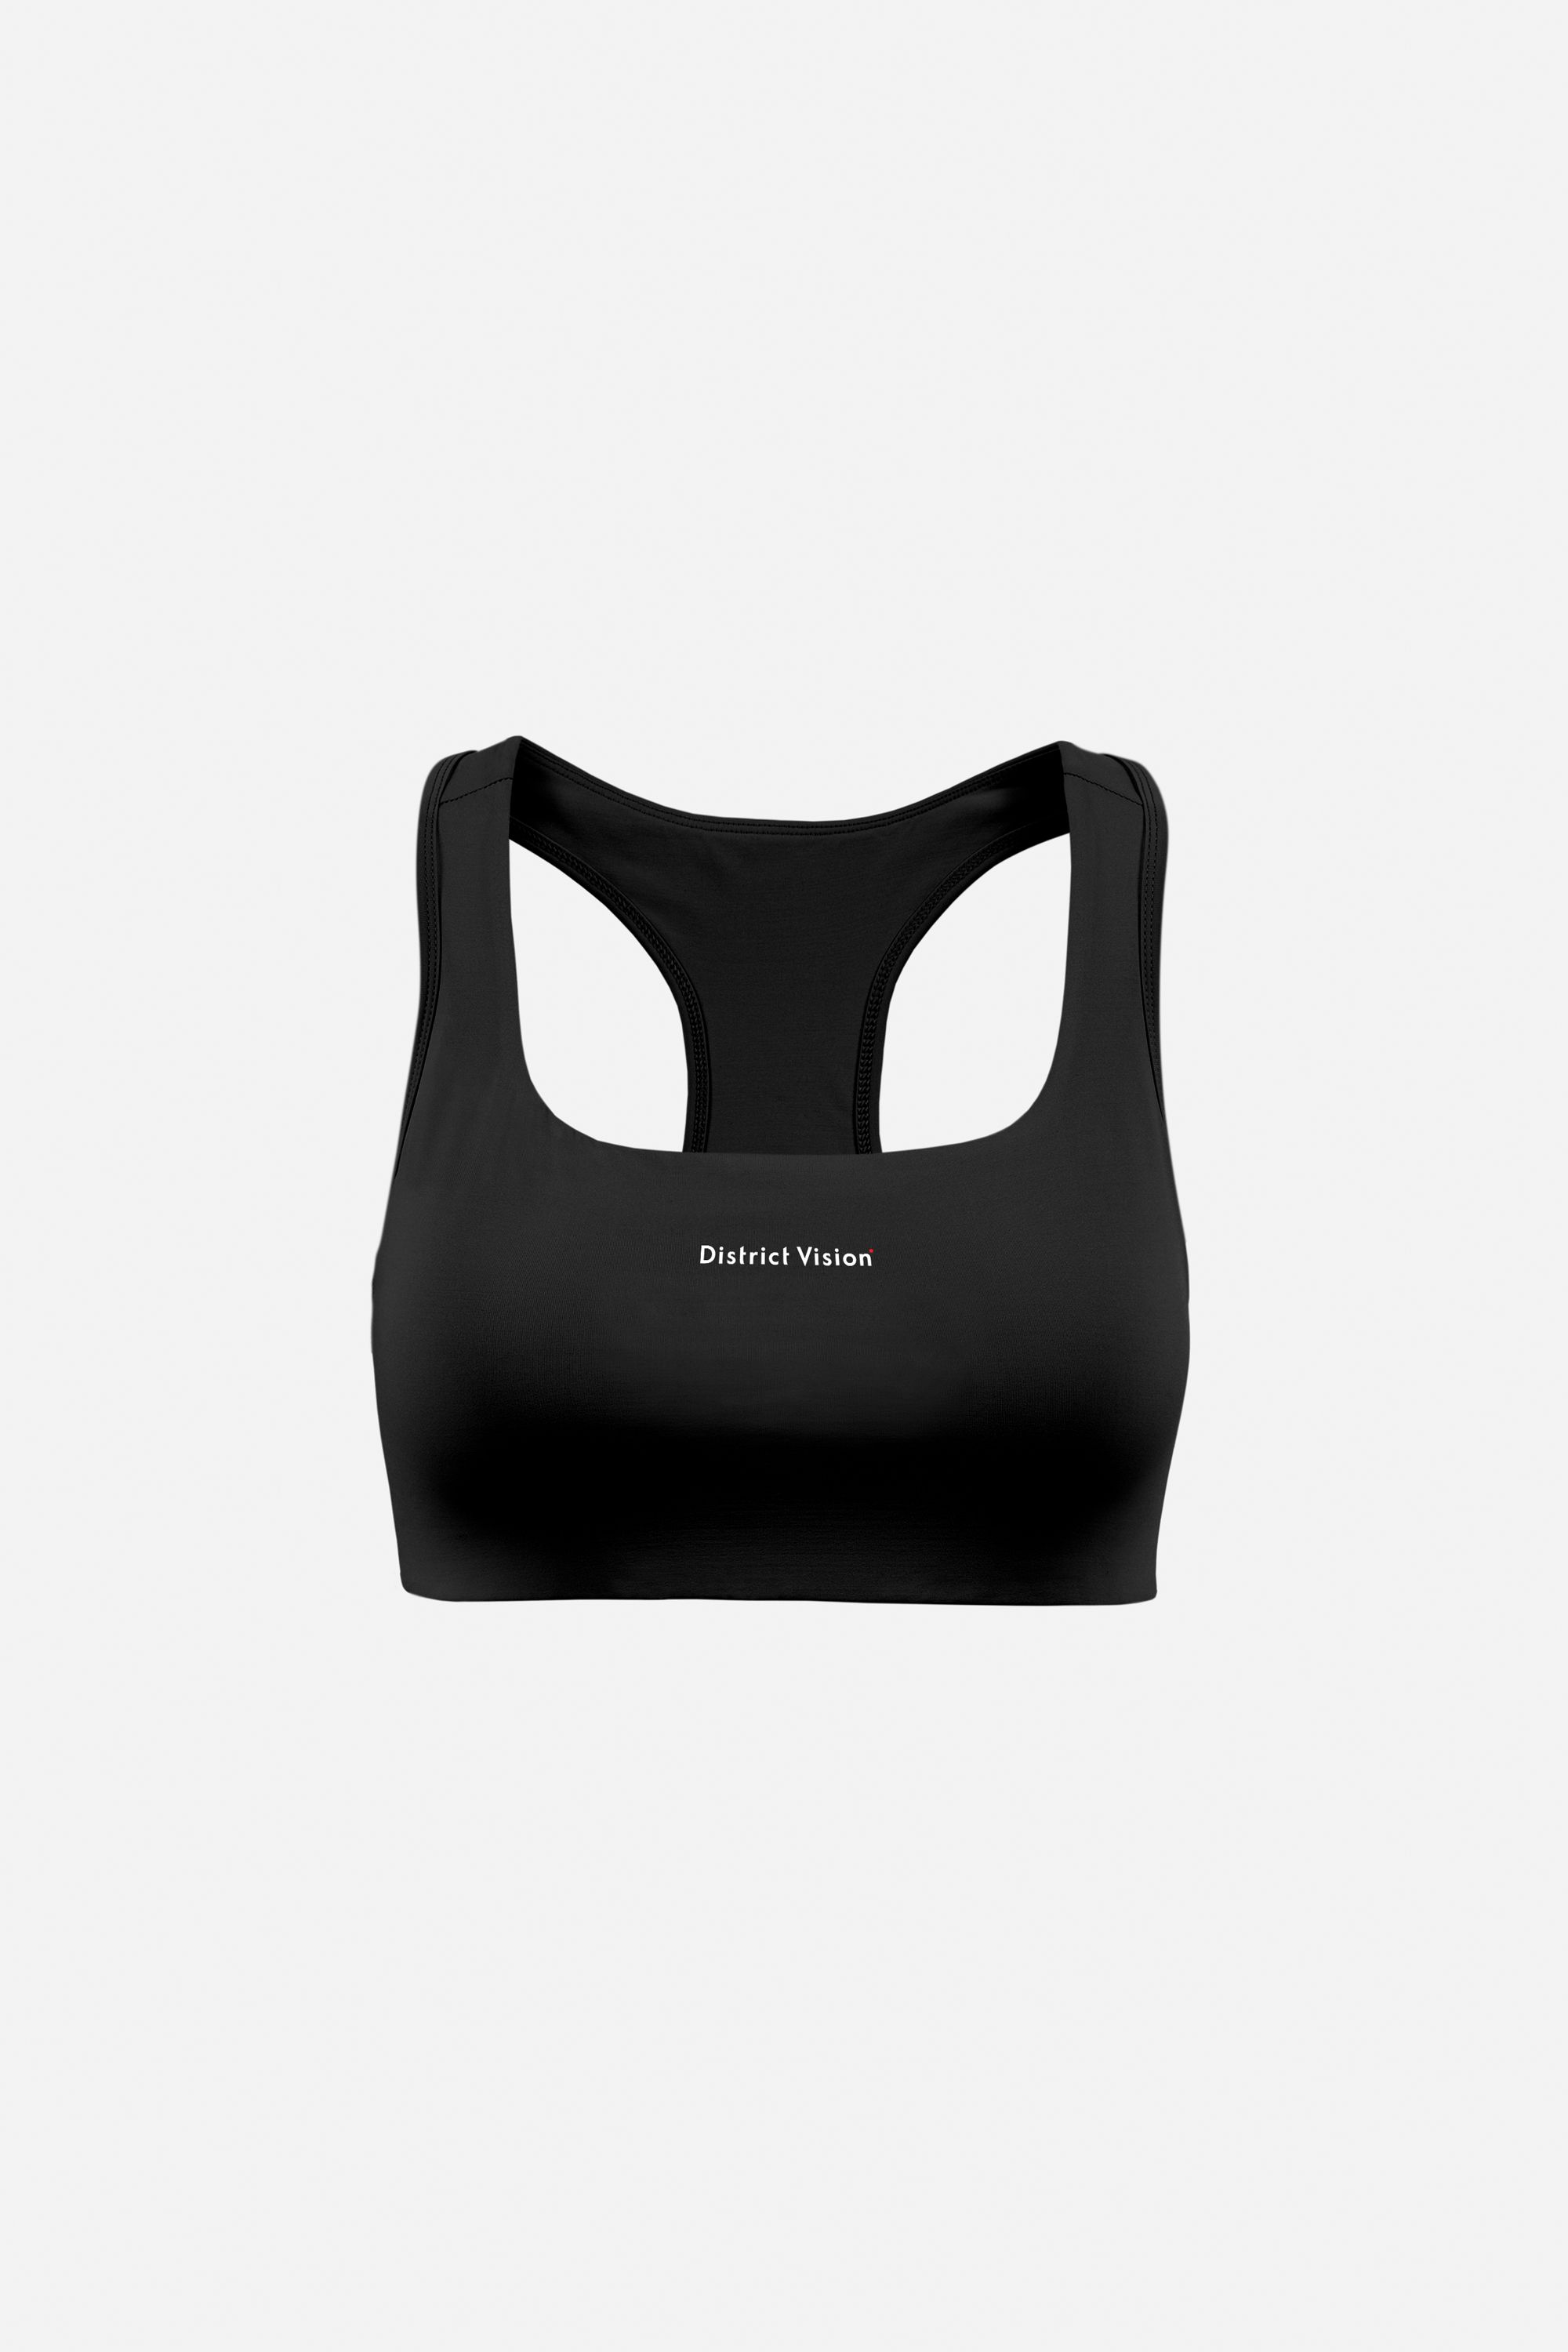 Blue Twin Layer Sport Bra by District Vision on Sale